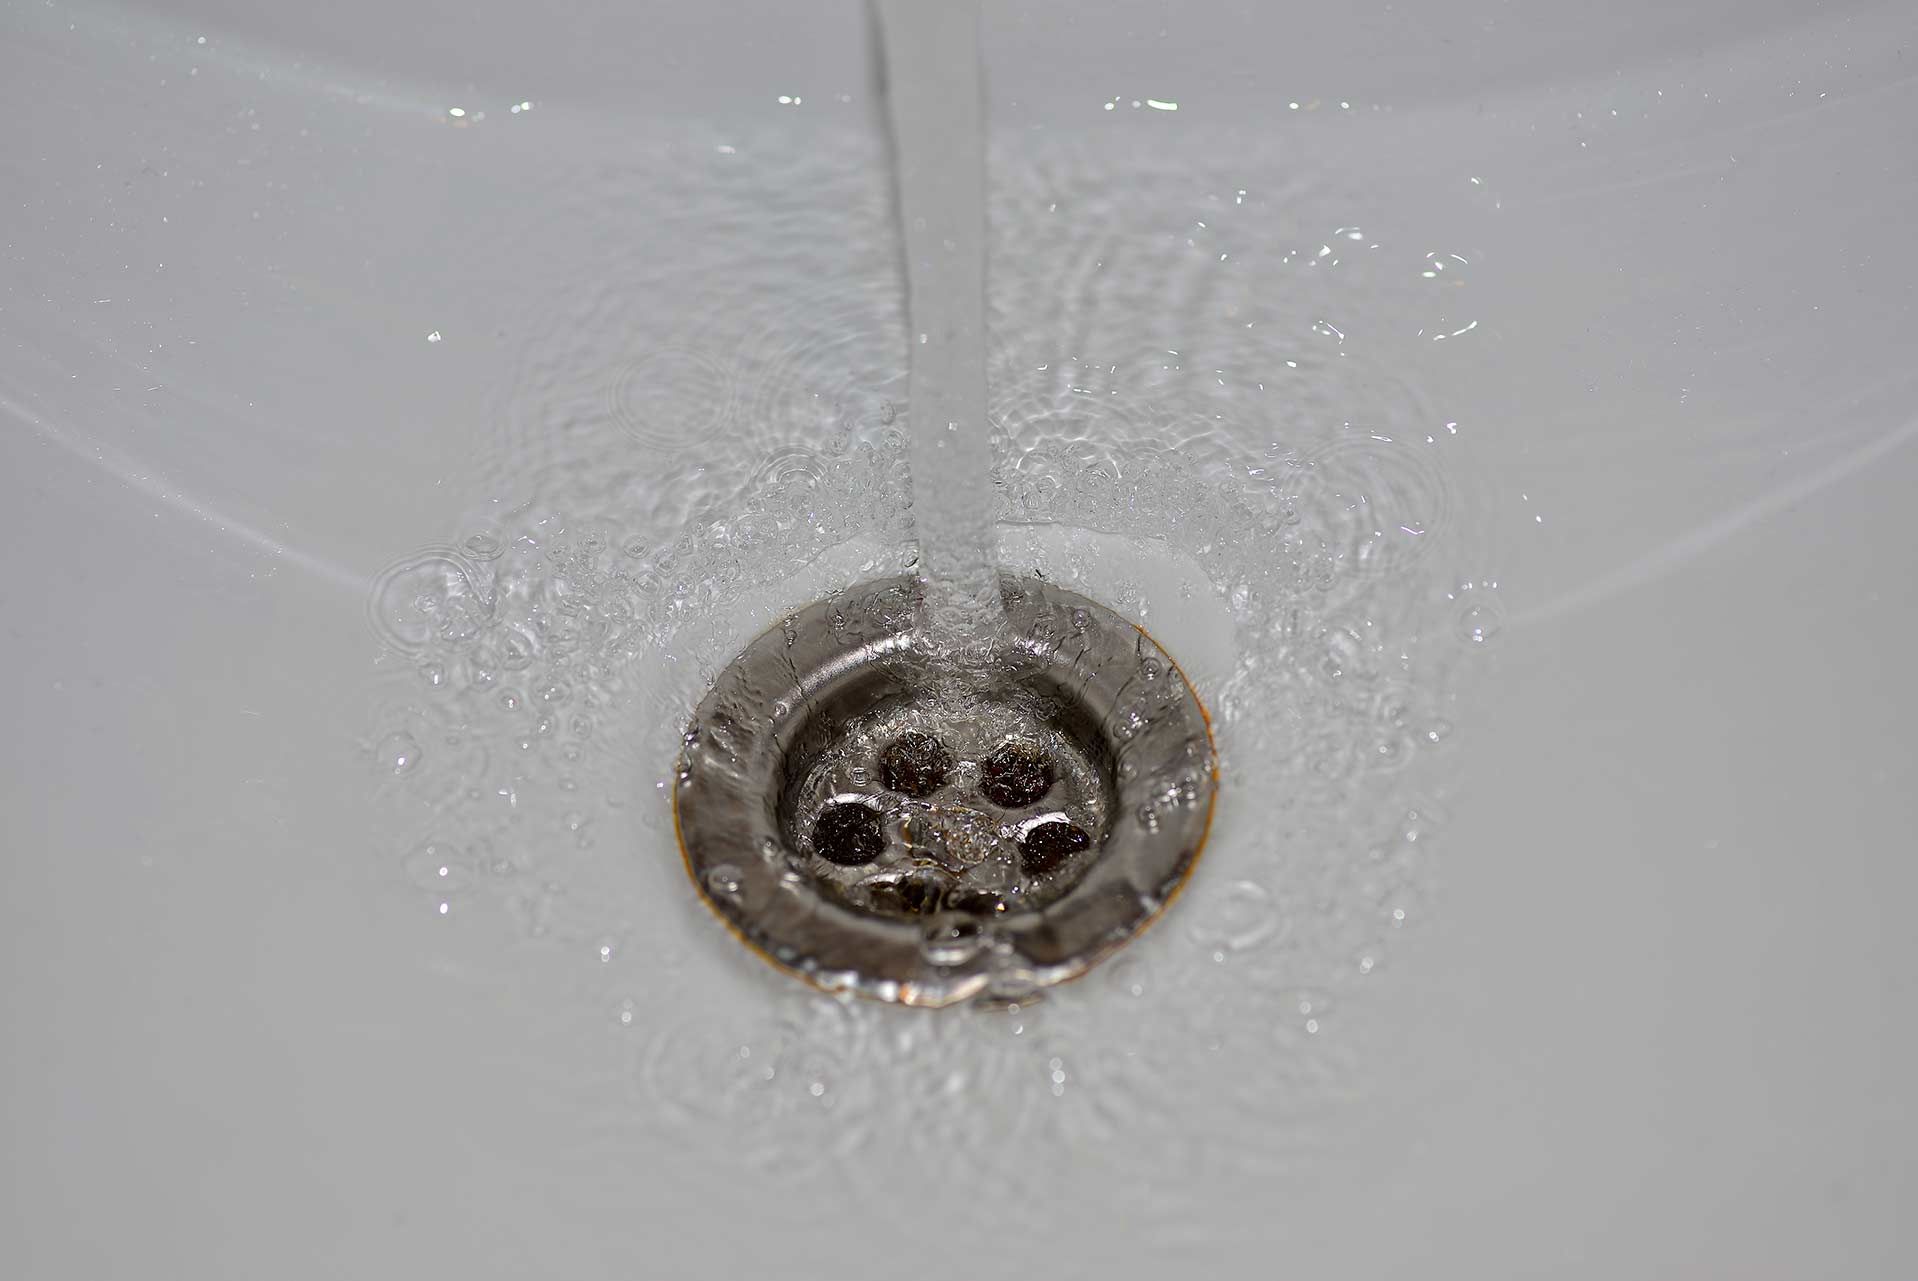 A2B Drains provides services to unblock blocked sinks and drains for properties in Pimlico.